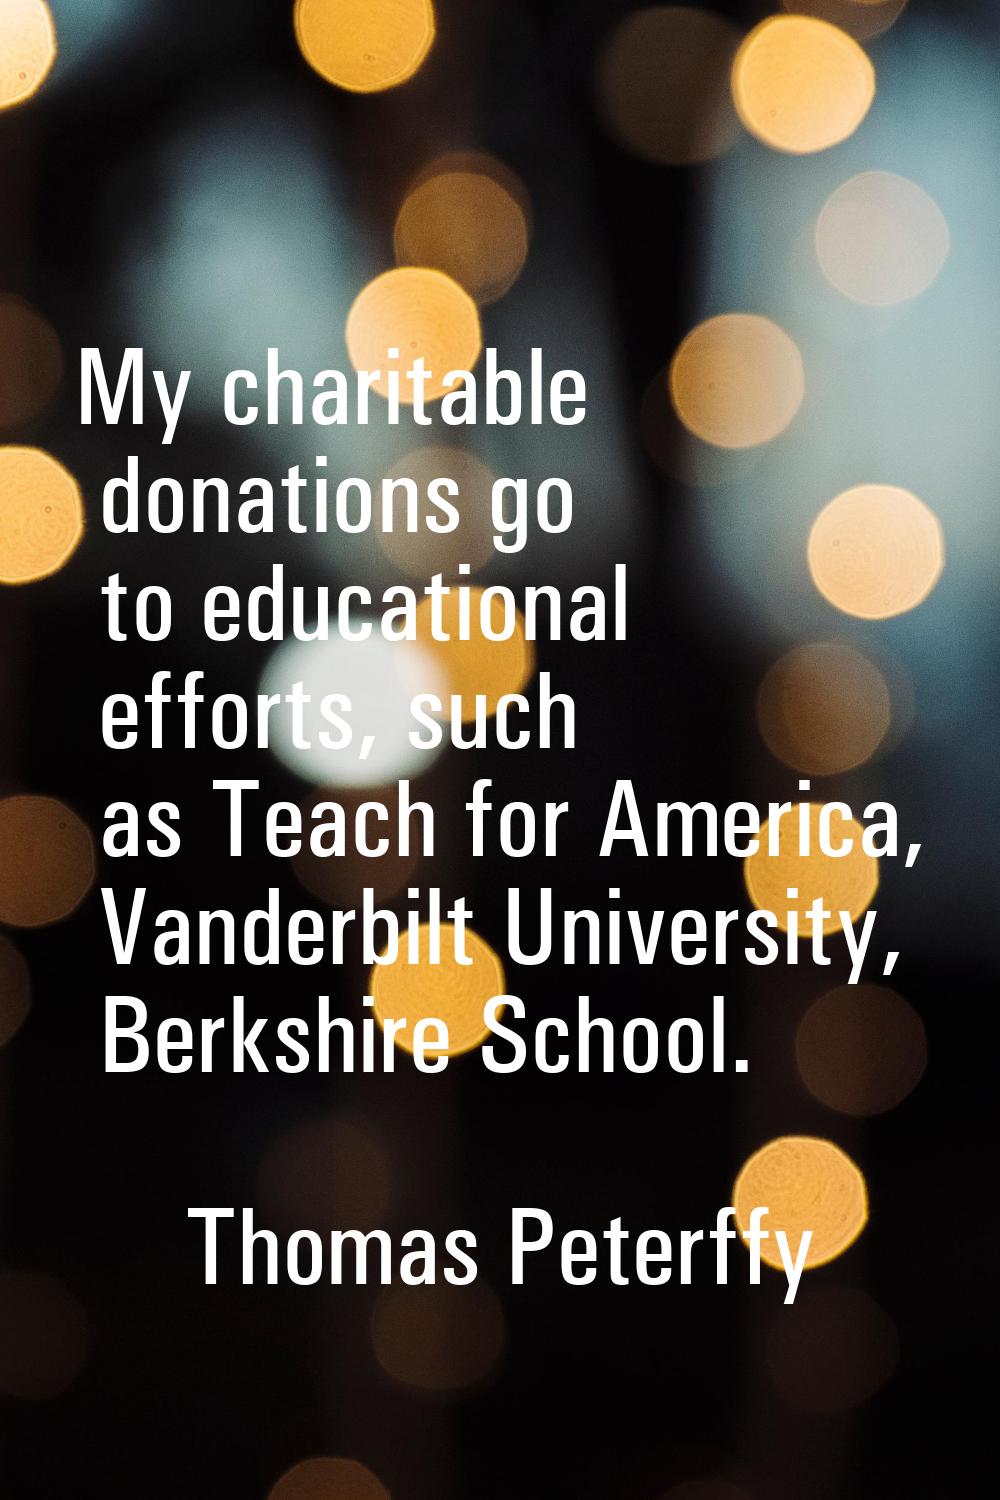 My charitable donations go to educational efforts, such as Teach for America, Vanderbilt University